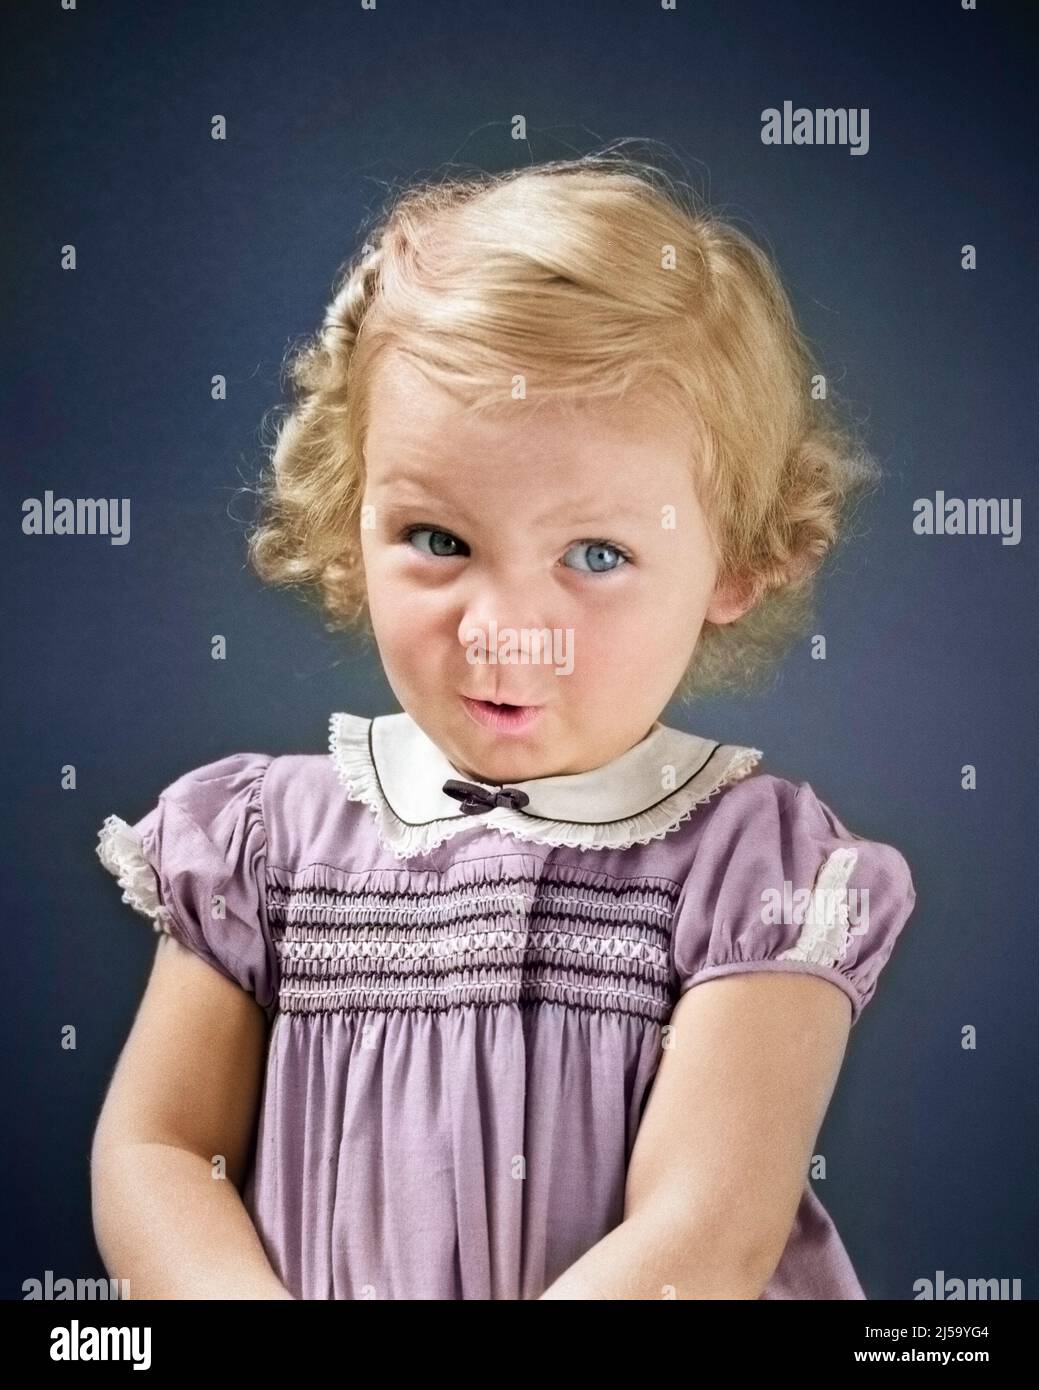 1930s 1940s BLOND TODDLER GIRL LOOKING AT CAMERA UP AND TO THE SIDE SHY BASHFUL FACIAL EXPRESSION WEARING DRESS WITH SMOCKING - j3100c HAR001 HARS STUDIO SHOT HOME LIFE COPY SPACE HALF-LENGTH EXPRESSIONS EYE CONTACT HAPPINESS DISCOVERY AND THE TO UP SHY PLEASANT AGREEABLE CHARMING JUVENILES LOVABLE PLEASING ADORABLE APPEALING BABY GIRL BASHFUL CAUCASIAN ETHNICITY HAR001 OLD FASHIONED SMOCKING Stock Photo